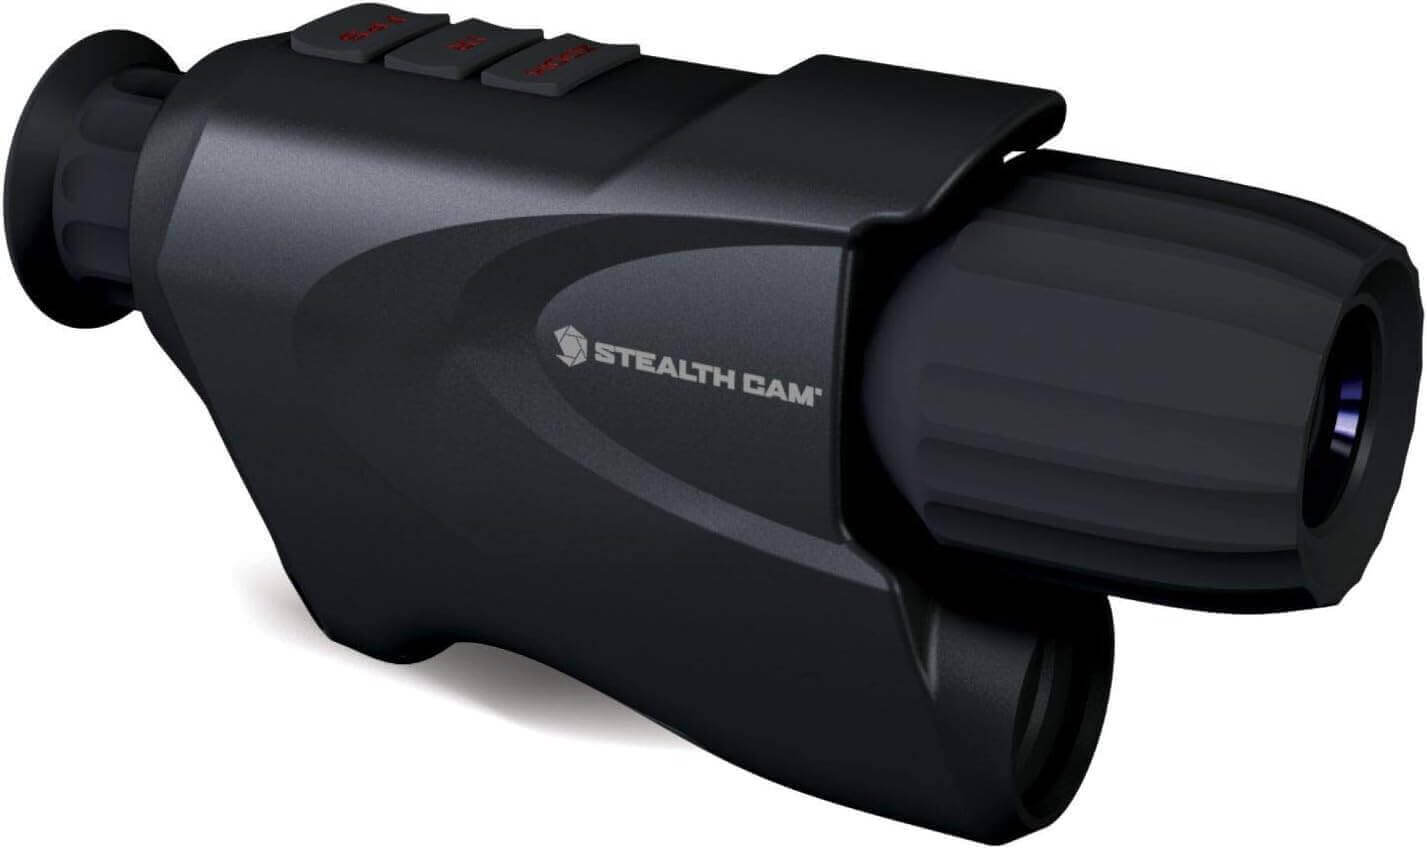 Stealth Cam Night Vision Monocular Review